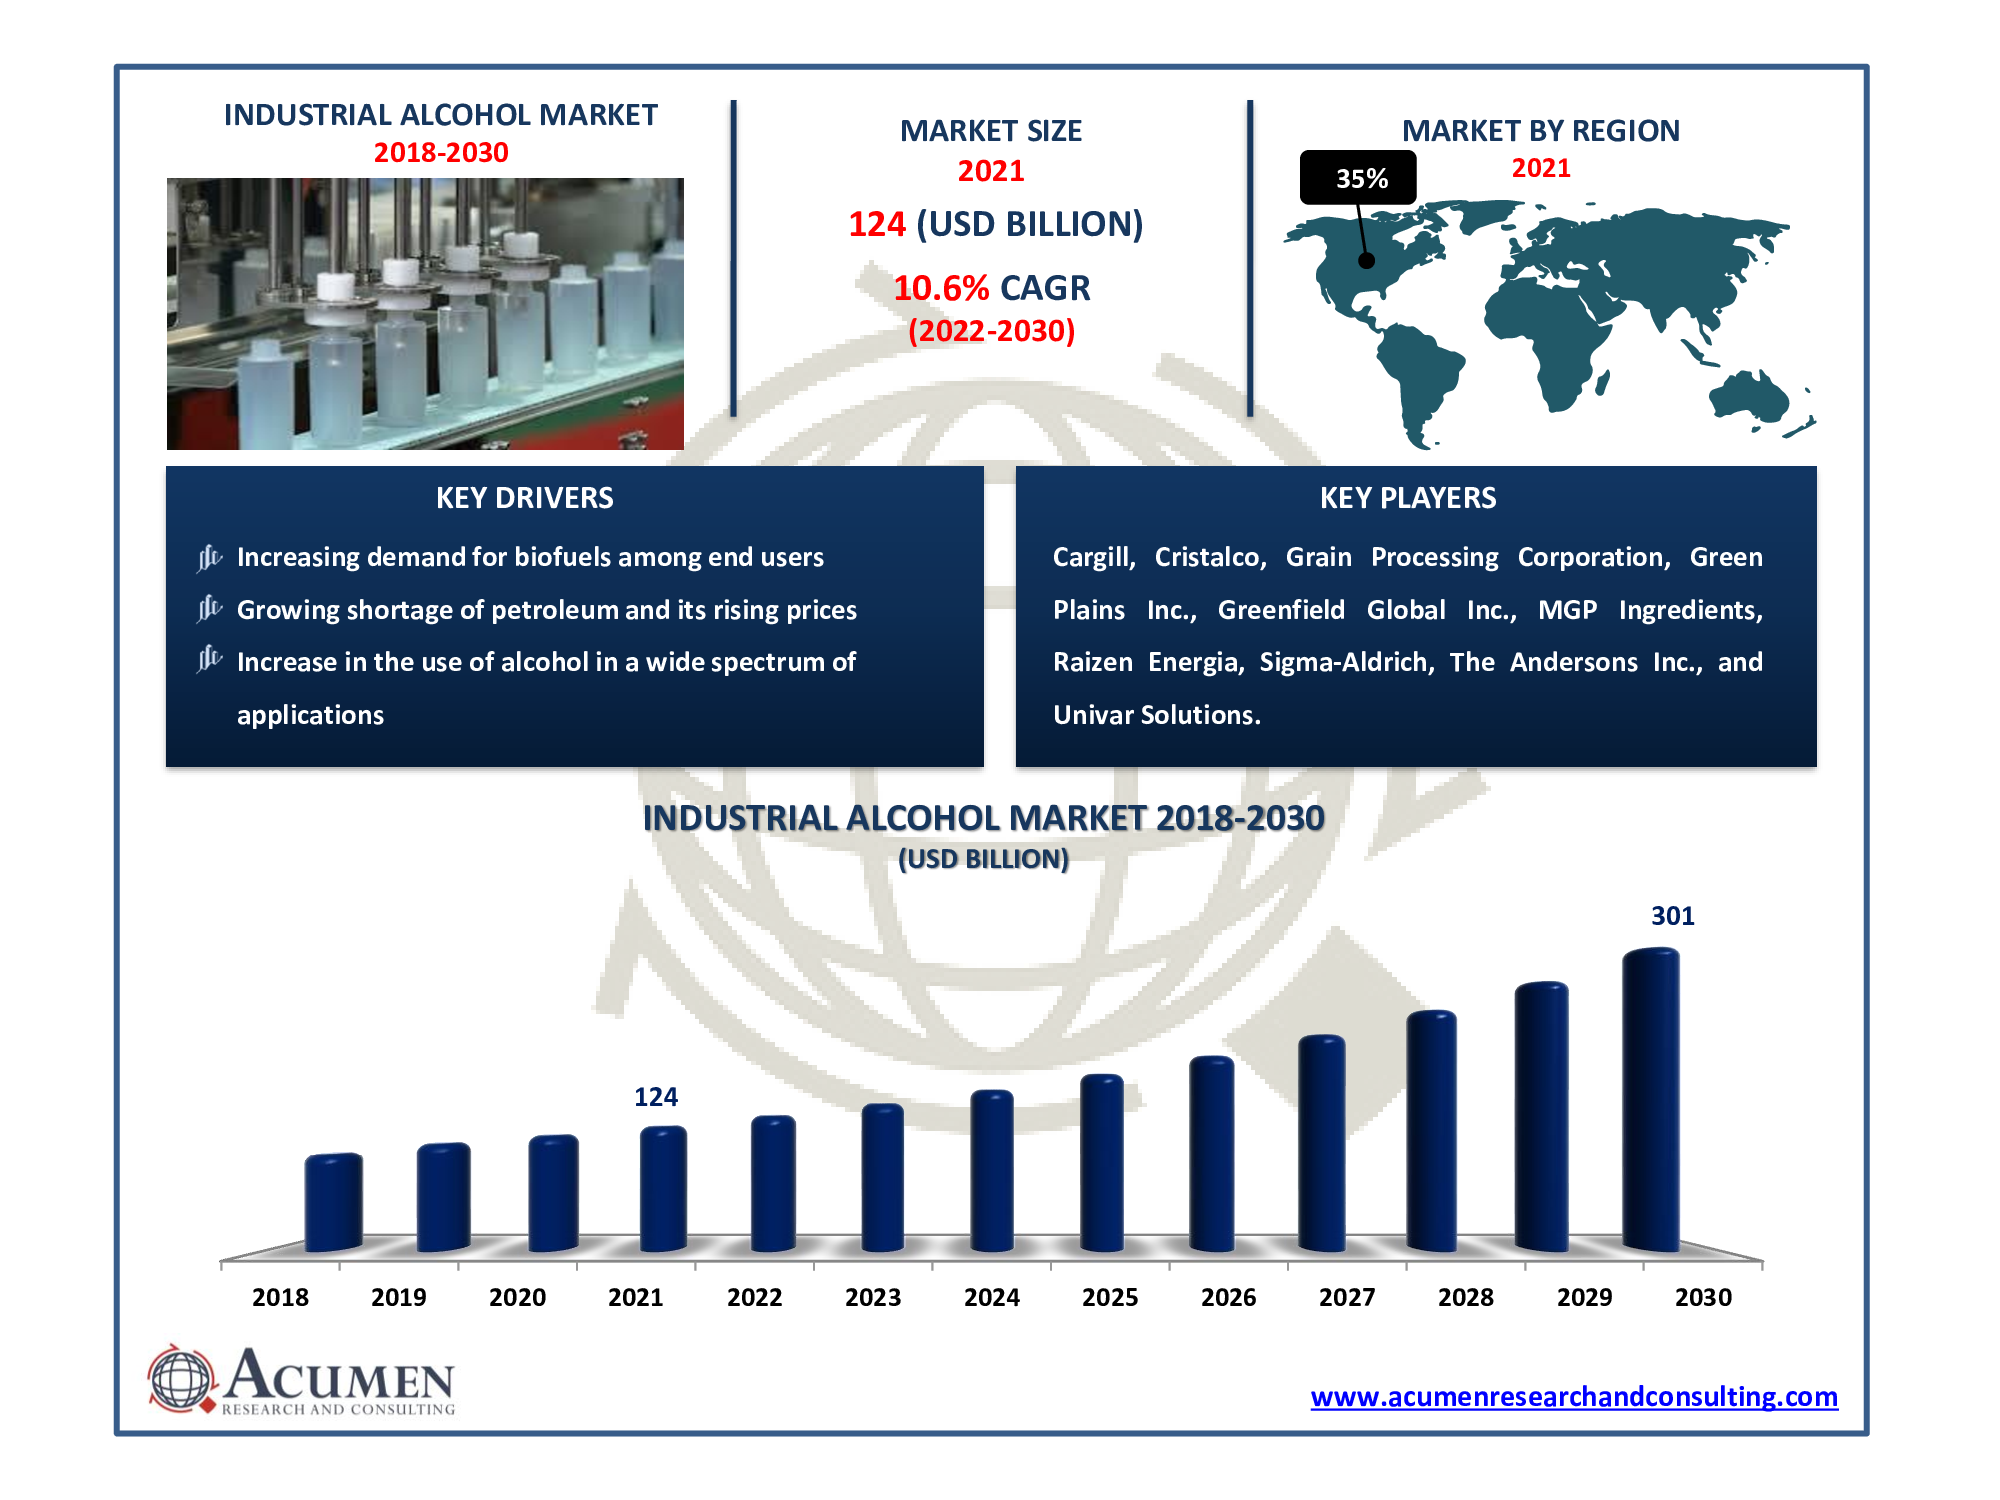 Industrial Alcohol Market size accounted for USD 124 Billion in 2021 and is estimated to reach the market value of USD 301 Billion by 2030.